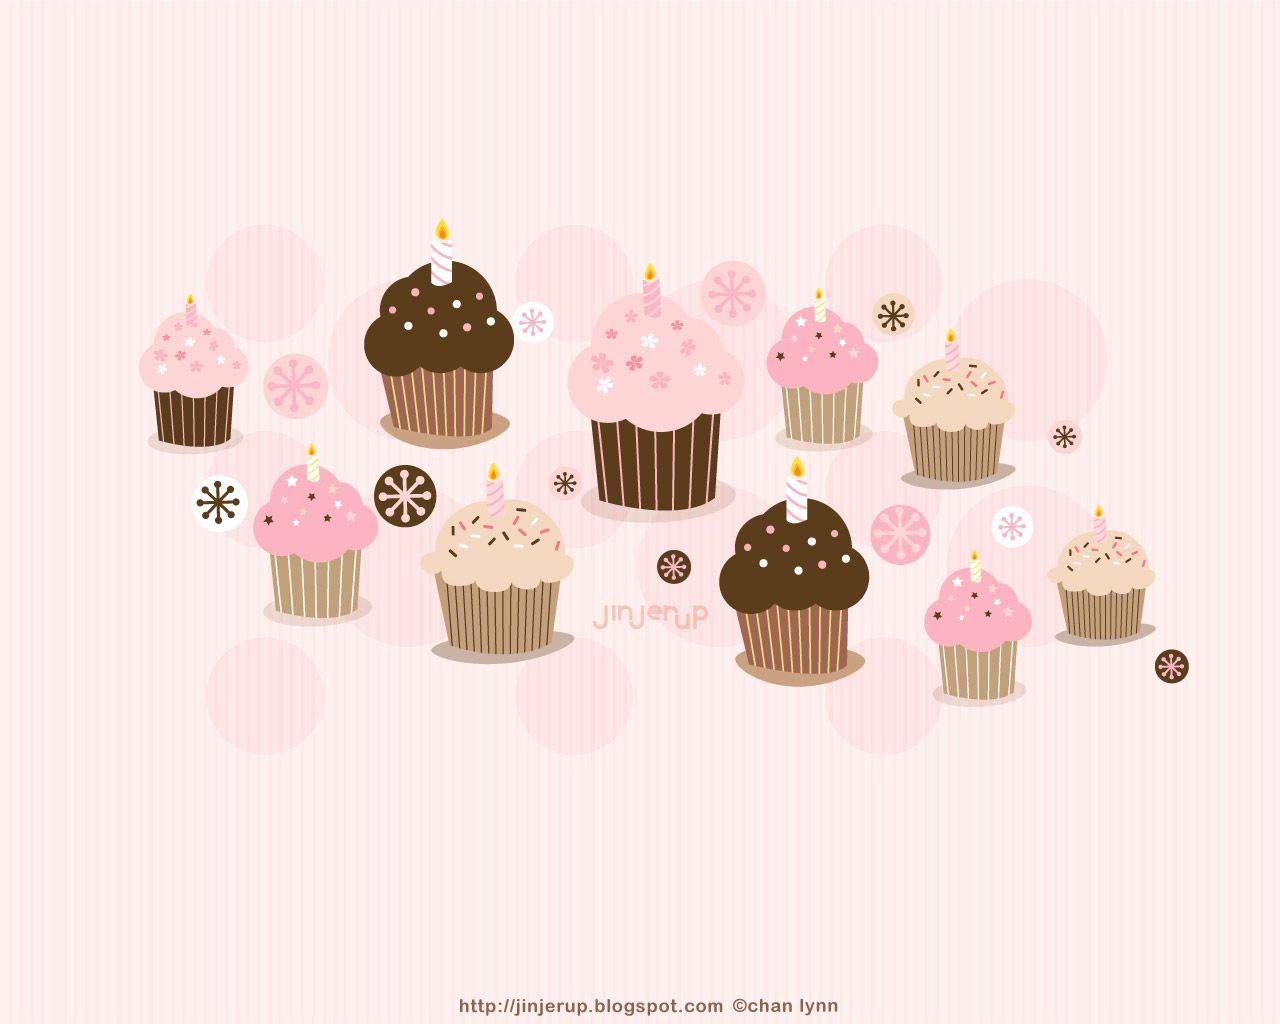 A pink background with cupcakes and candles - Cupcakes